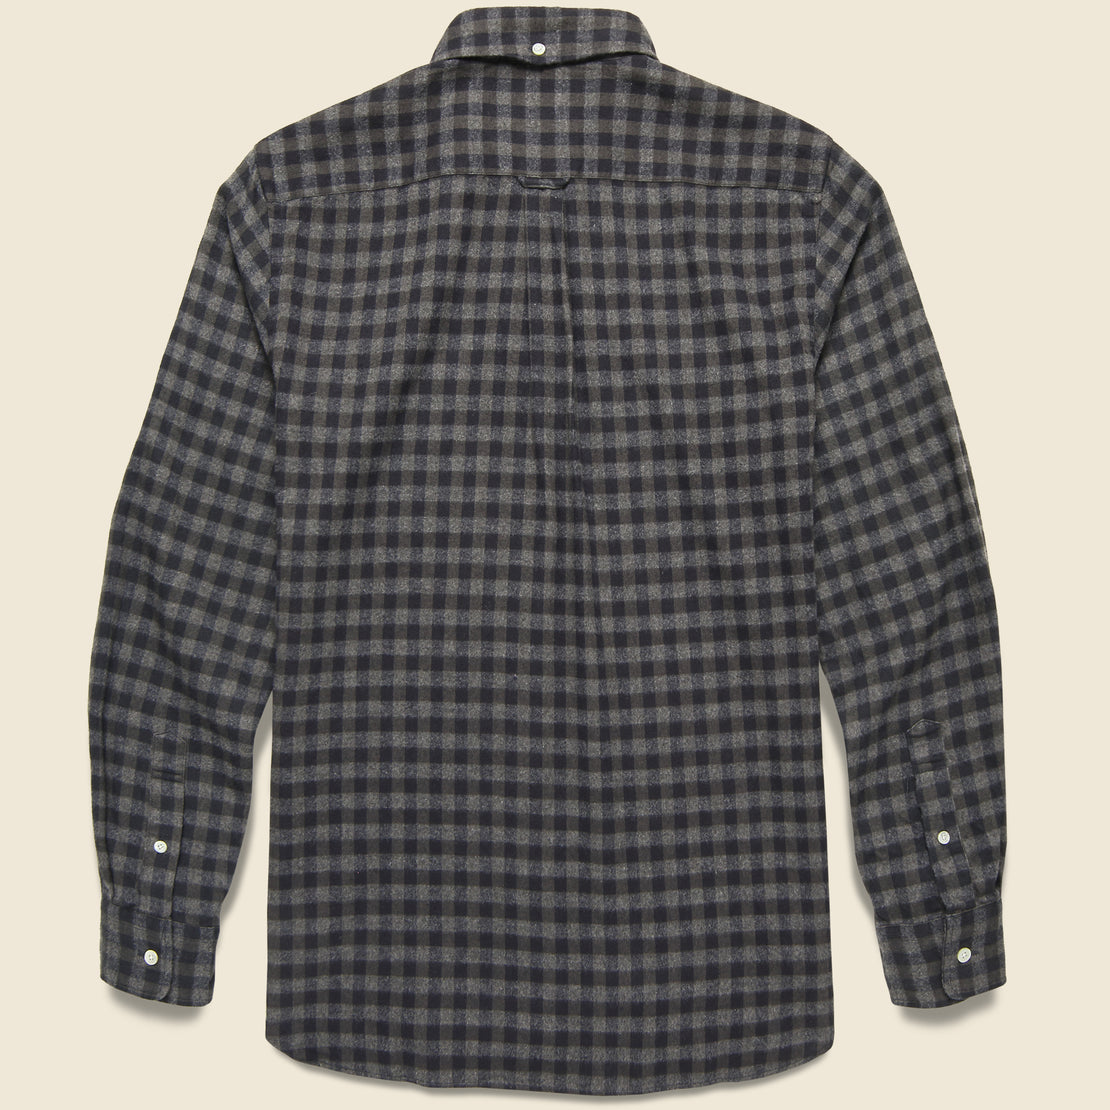 Shaggy Check Shirt - Grey Gingham - BEAMS+ - STAG Provisions - Tops - L/S Woven - Plaid